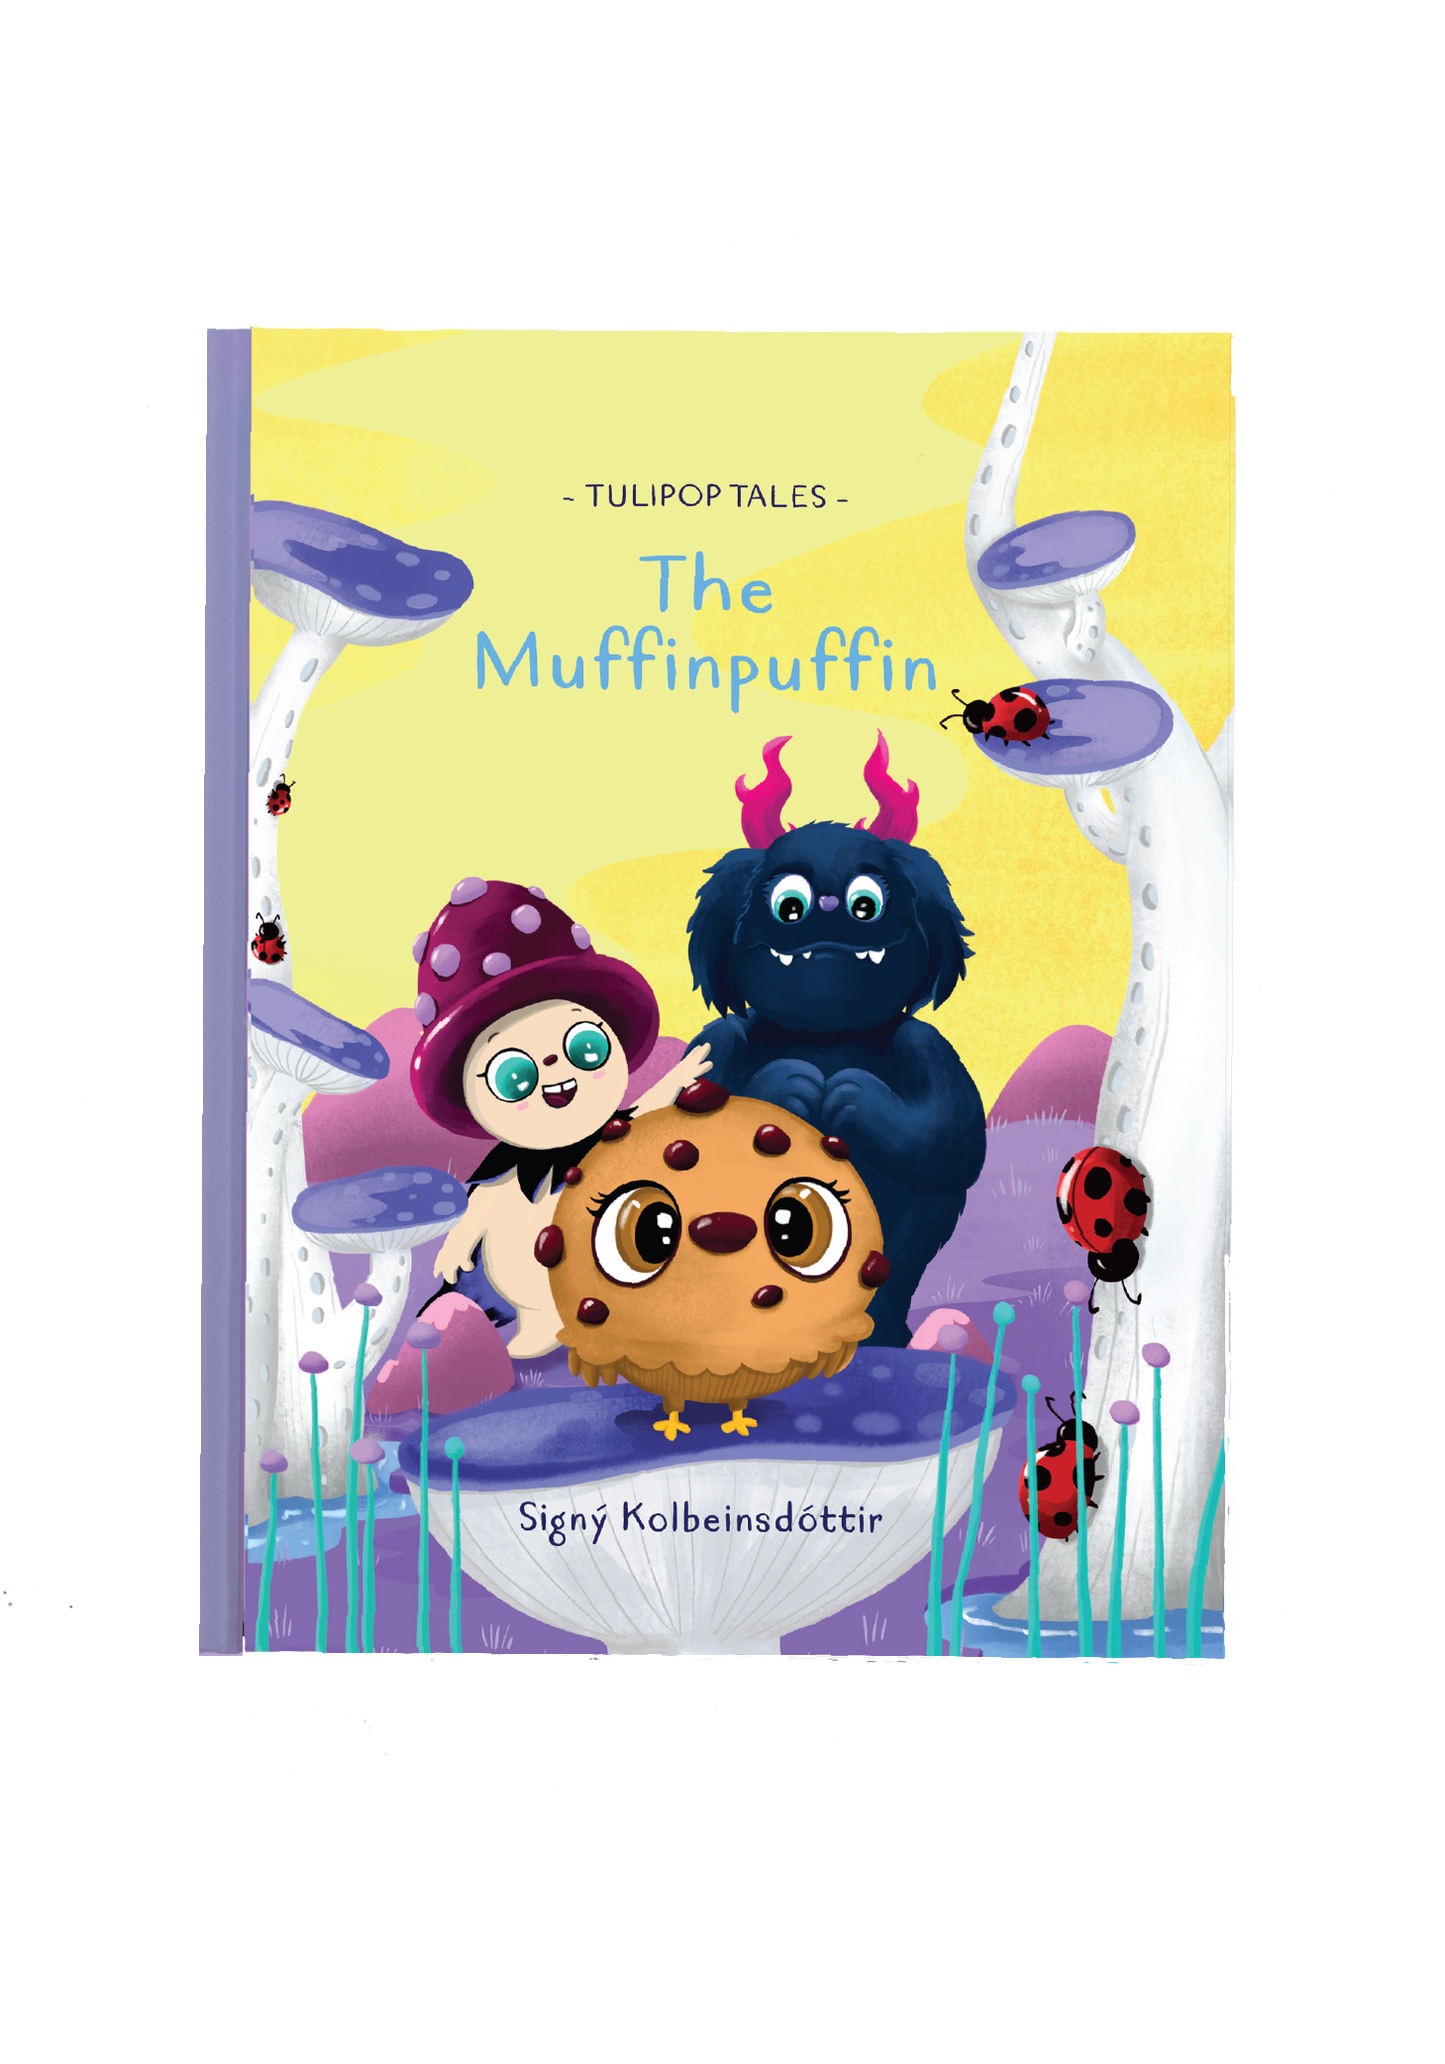 Tulipop Tales: The Muffinpuffin